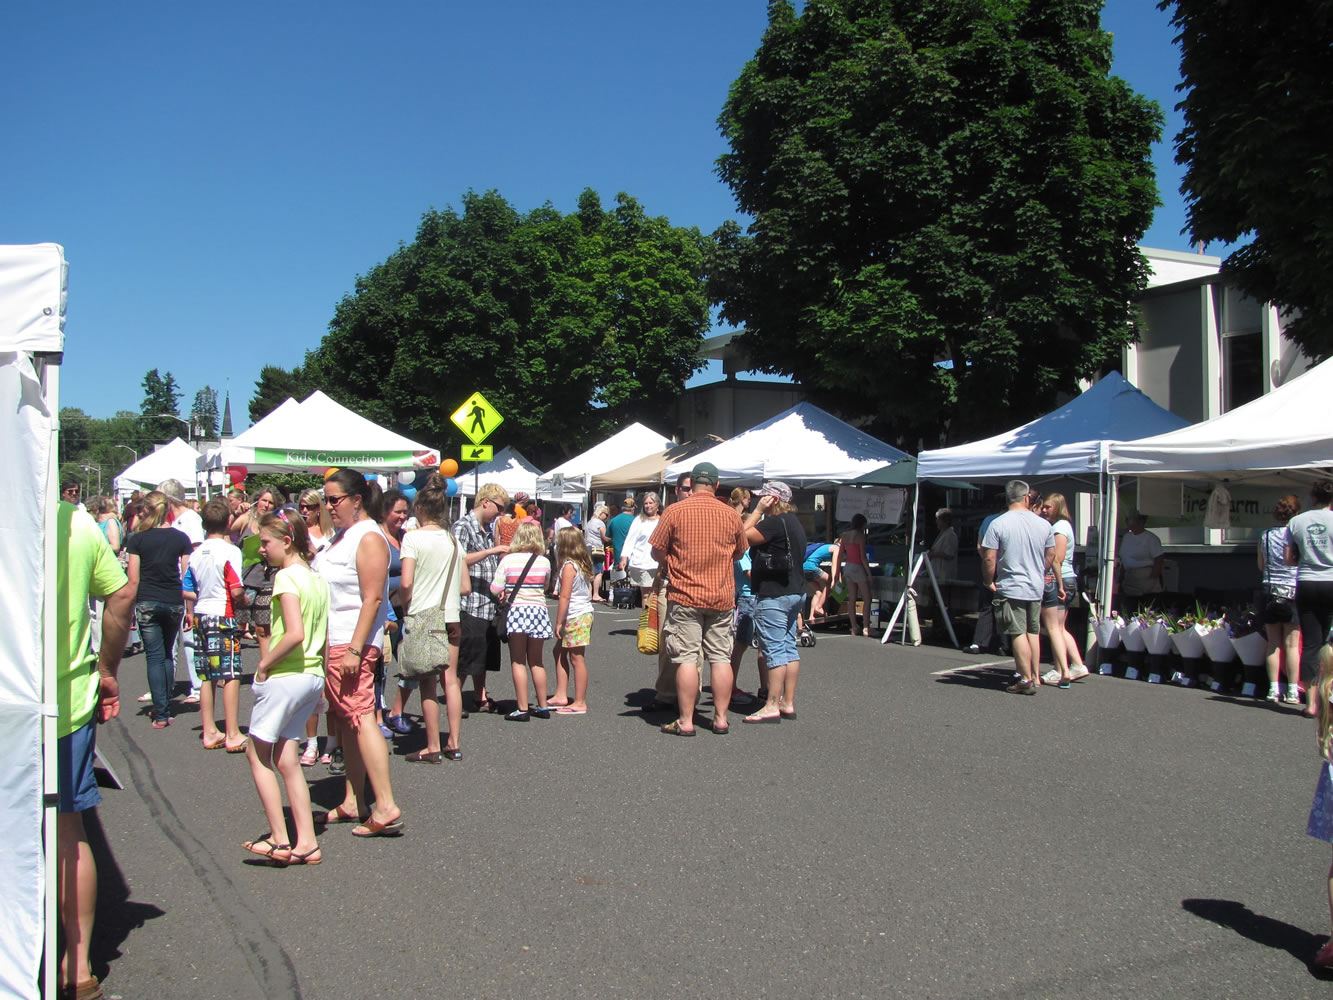 The Camas Farmer's Market will kick off its seventh season on Wednesday, June 4, with locally grown produce, food, new offerings and a health fair featuring Pure Wellness Chiropractic.